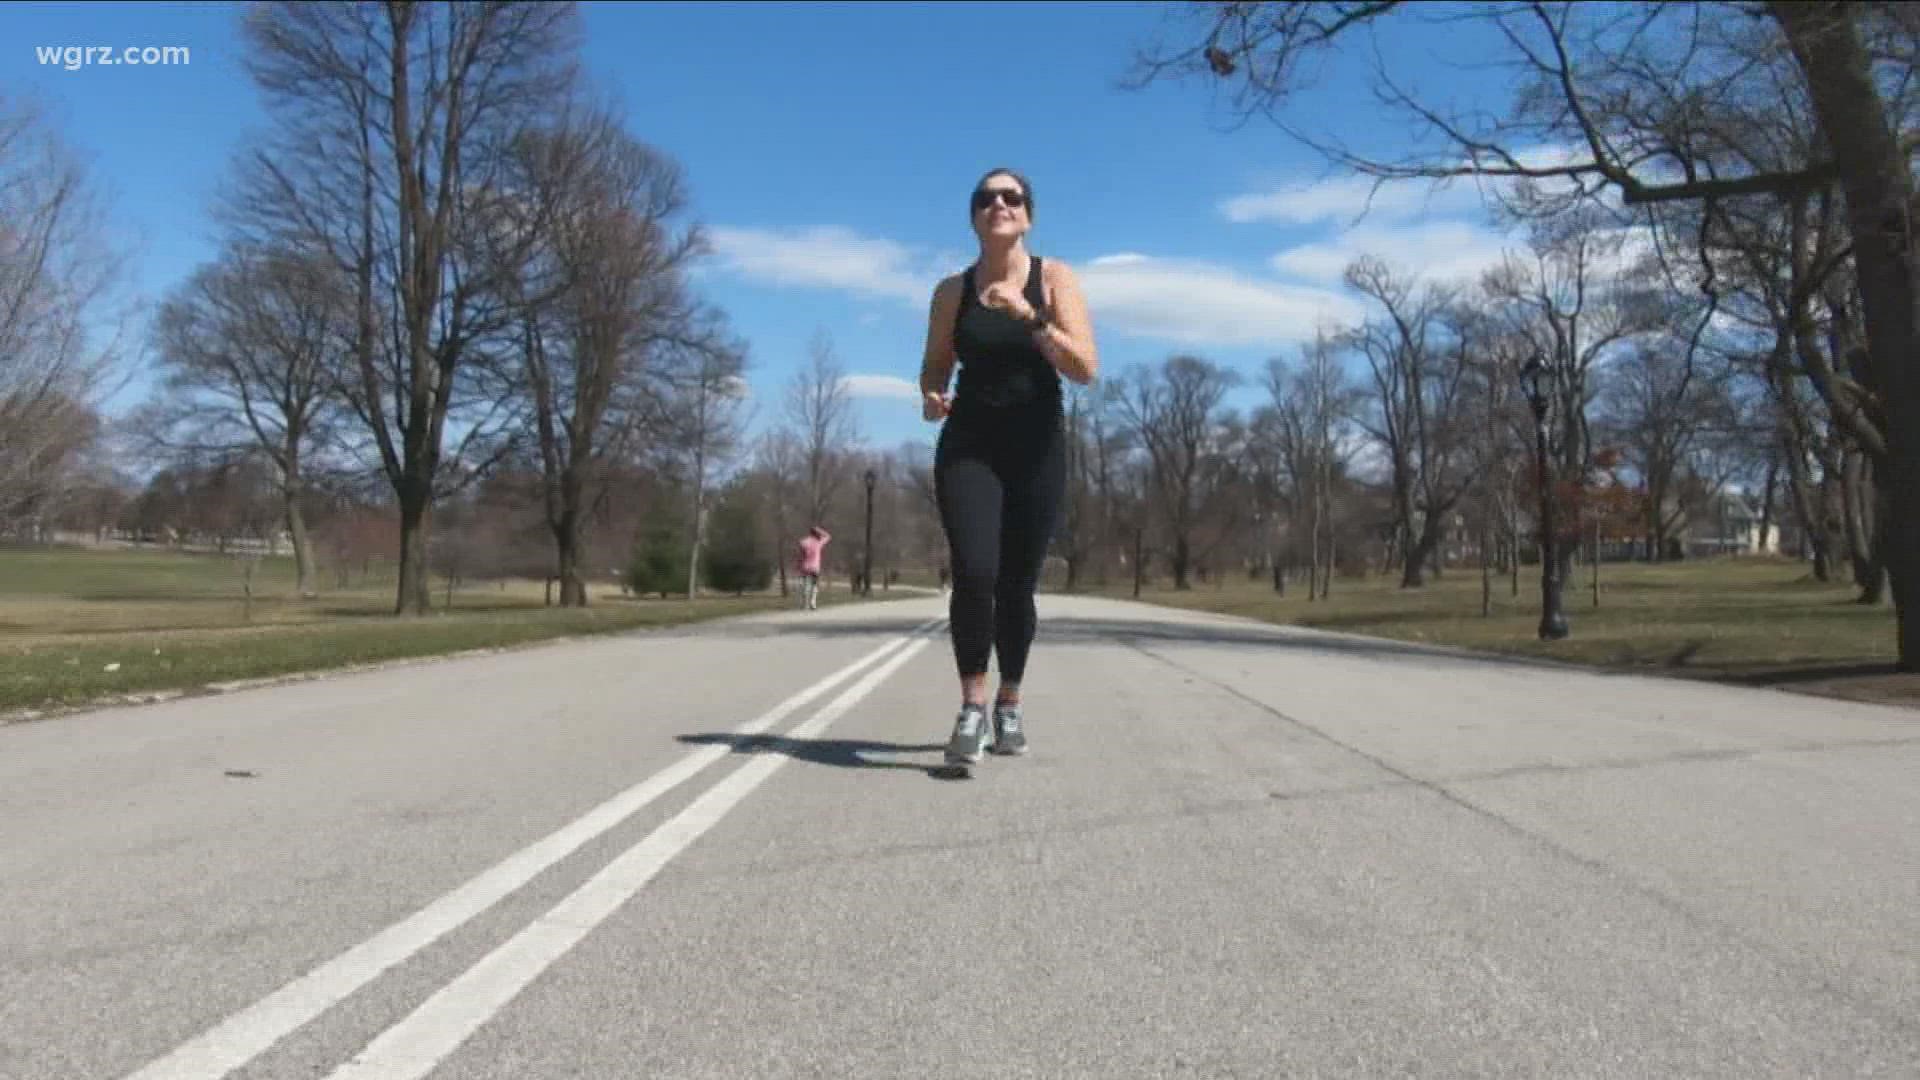 It's a story of determination and dedication. Jackey Deschamps honors Natasha Cassick by running the Boston Marathon.